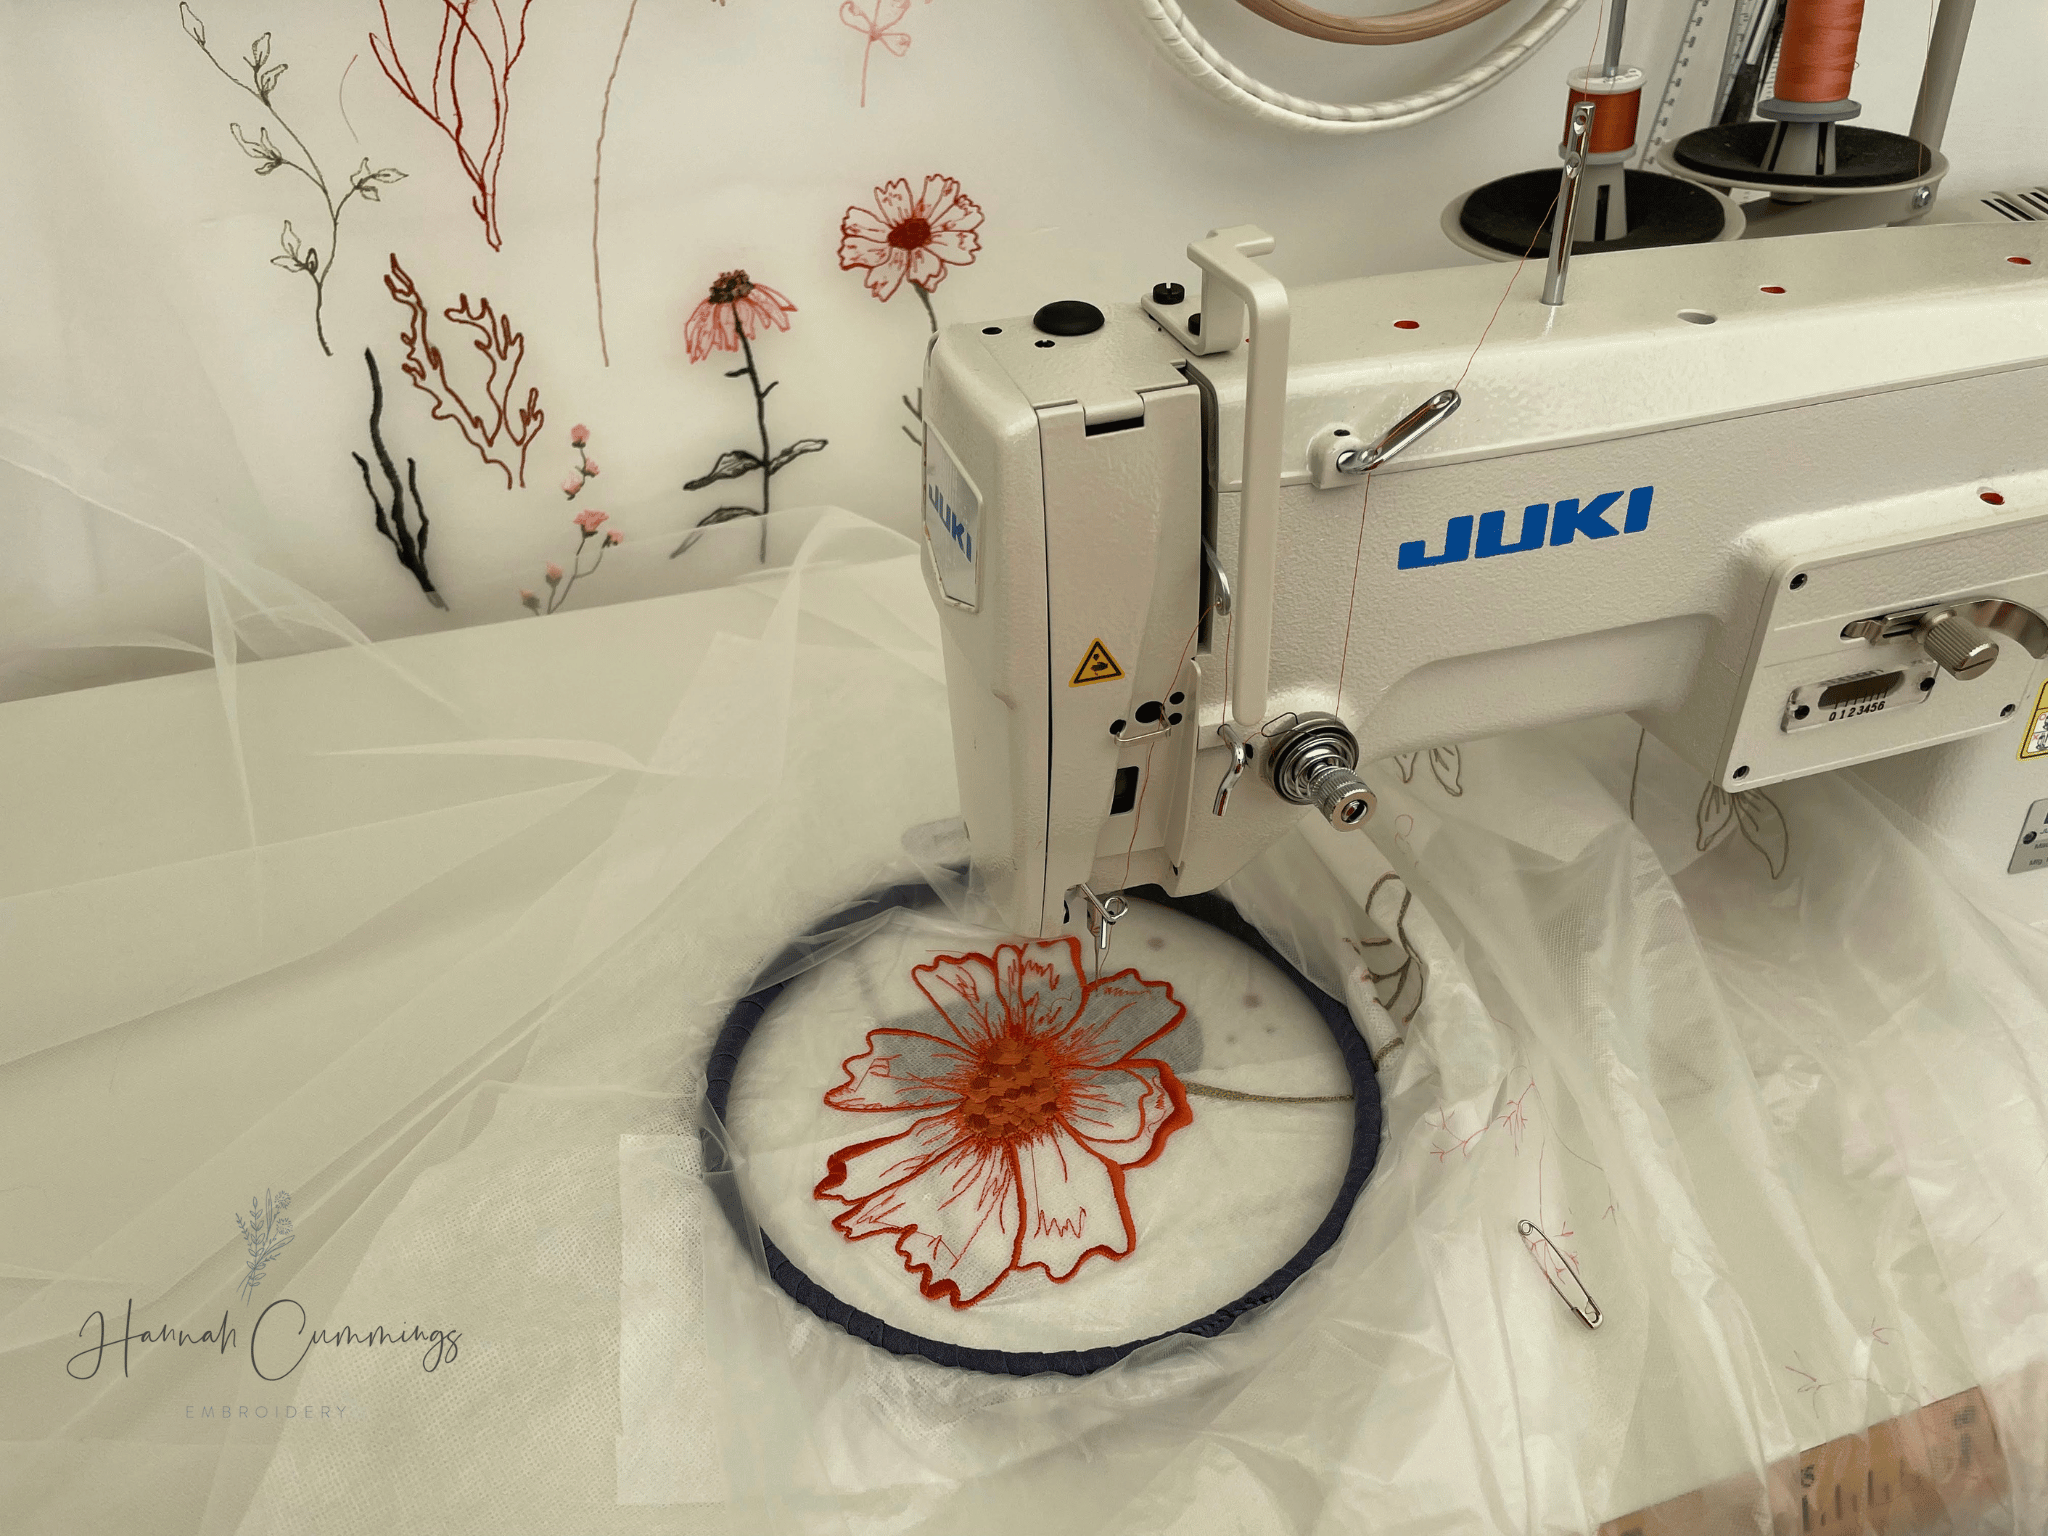  Embroidered flower being stitched at sewing machine 